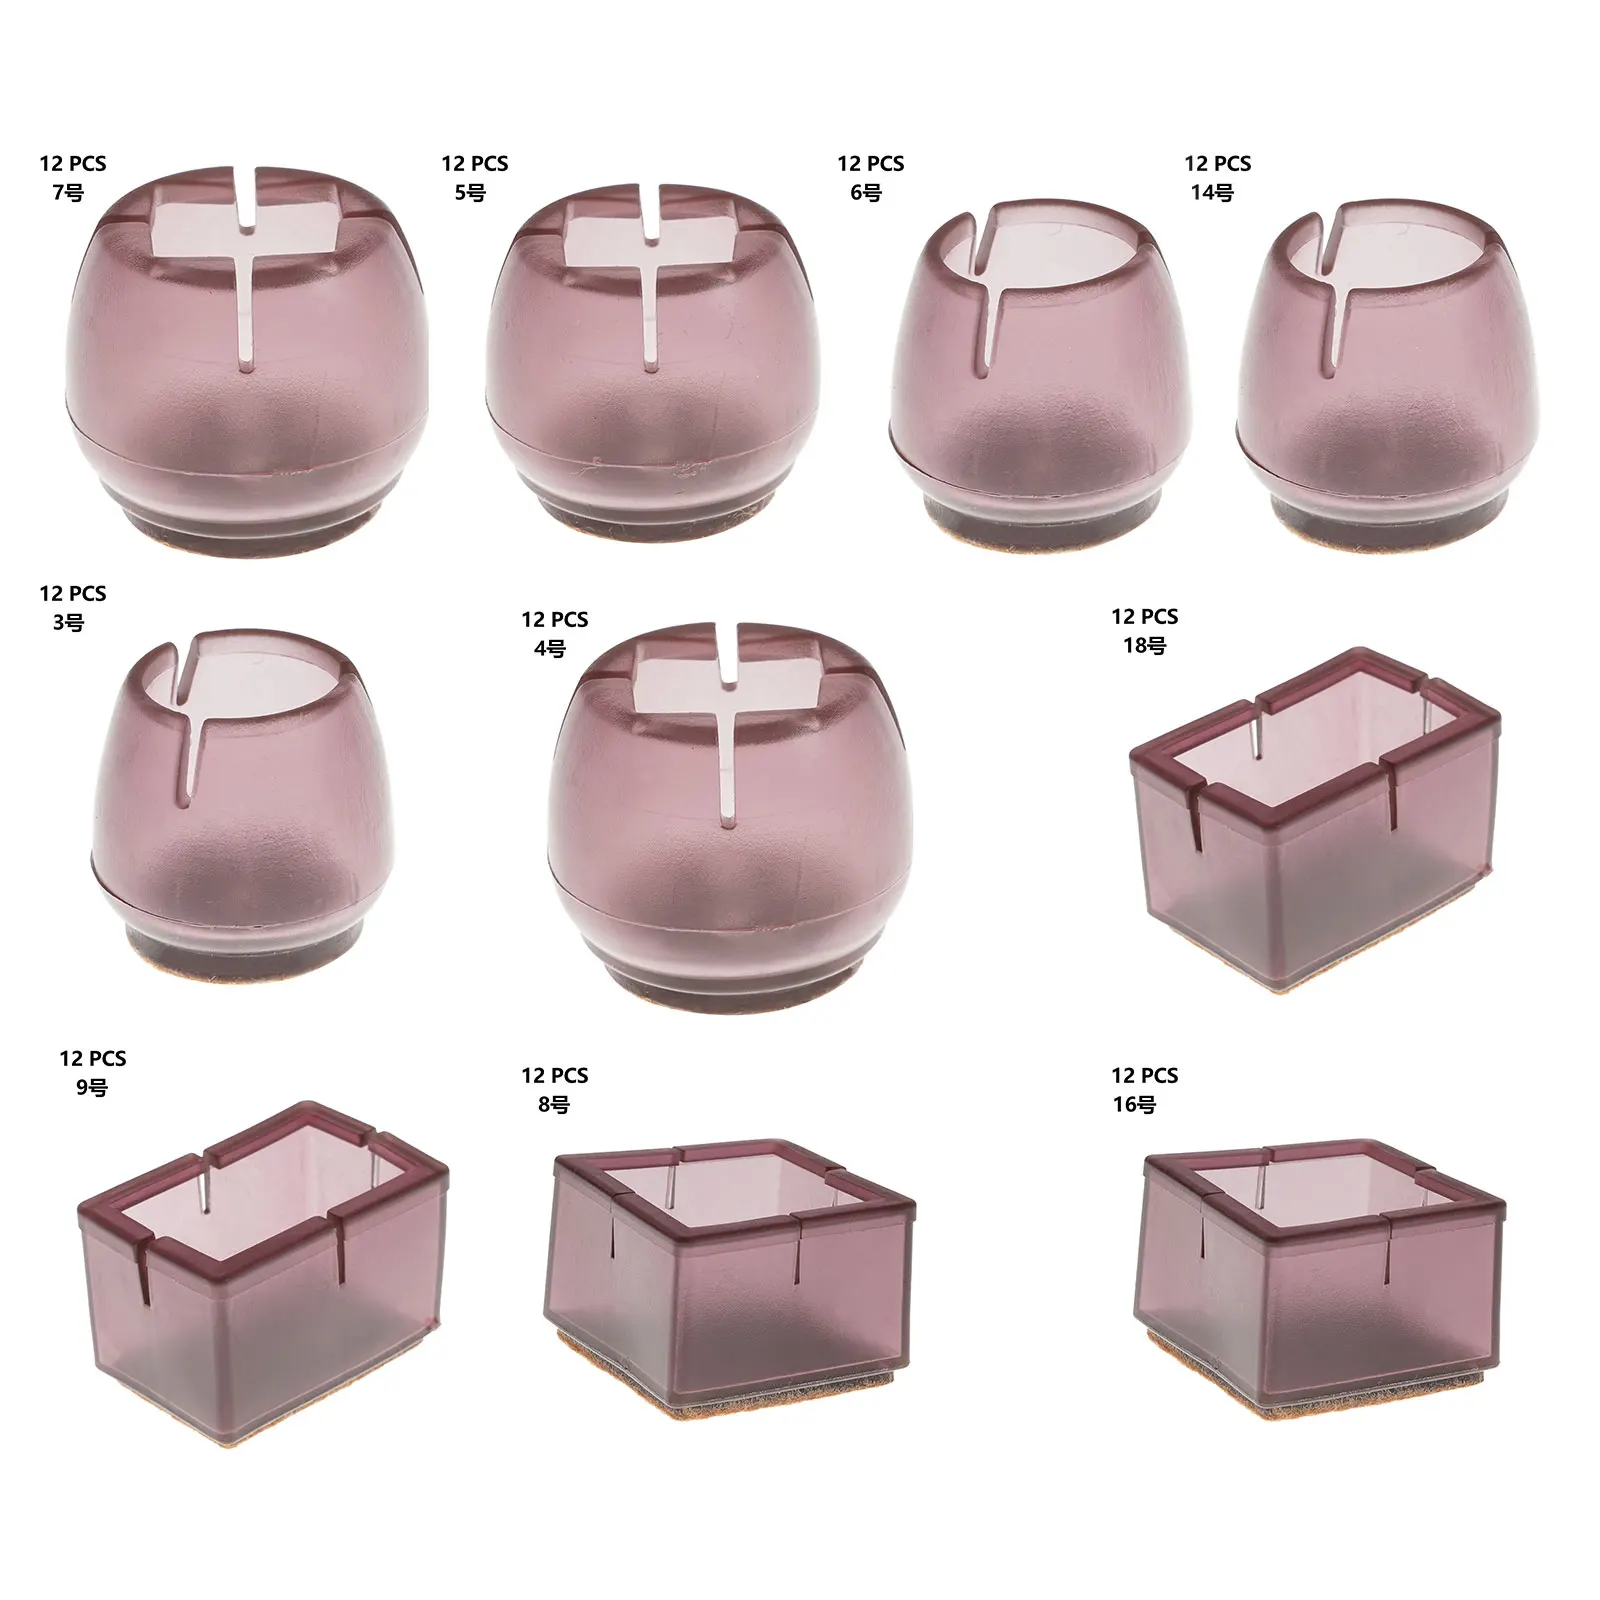 

12P Silicone Chair Plugs Table Foot Pads 15-45mm Round Square Rectangle Pads Non-slip Furniture Cover Floor Protectors Foot Pads